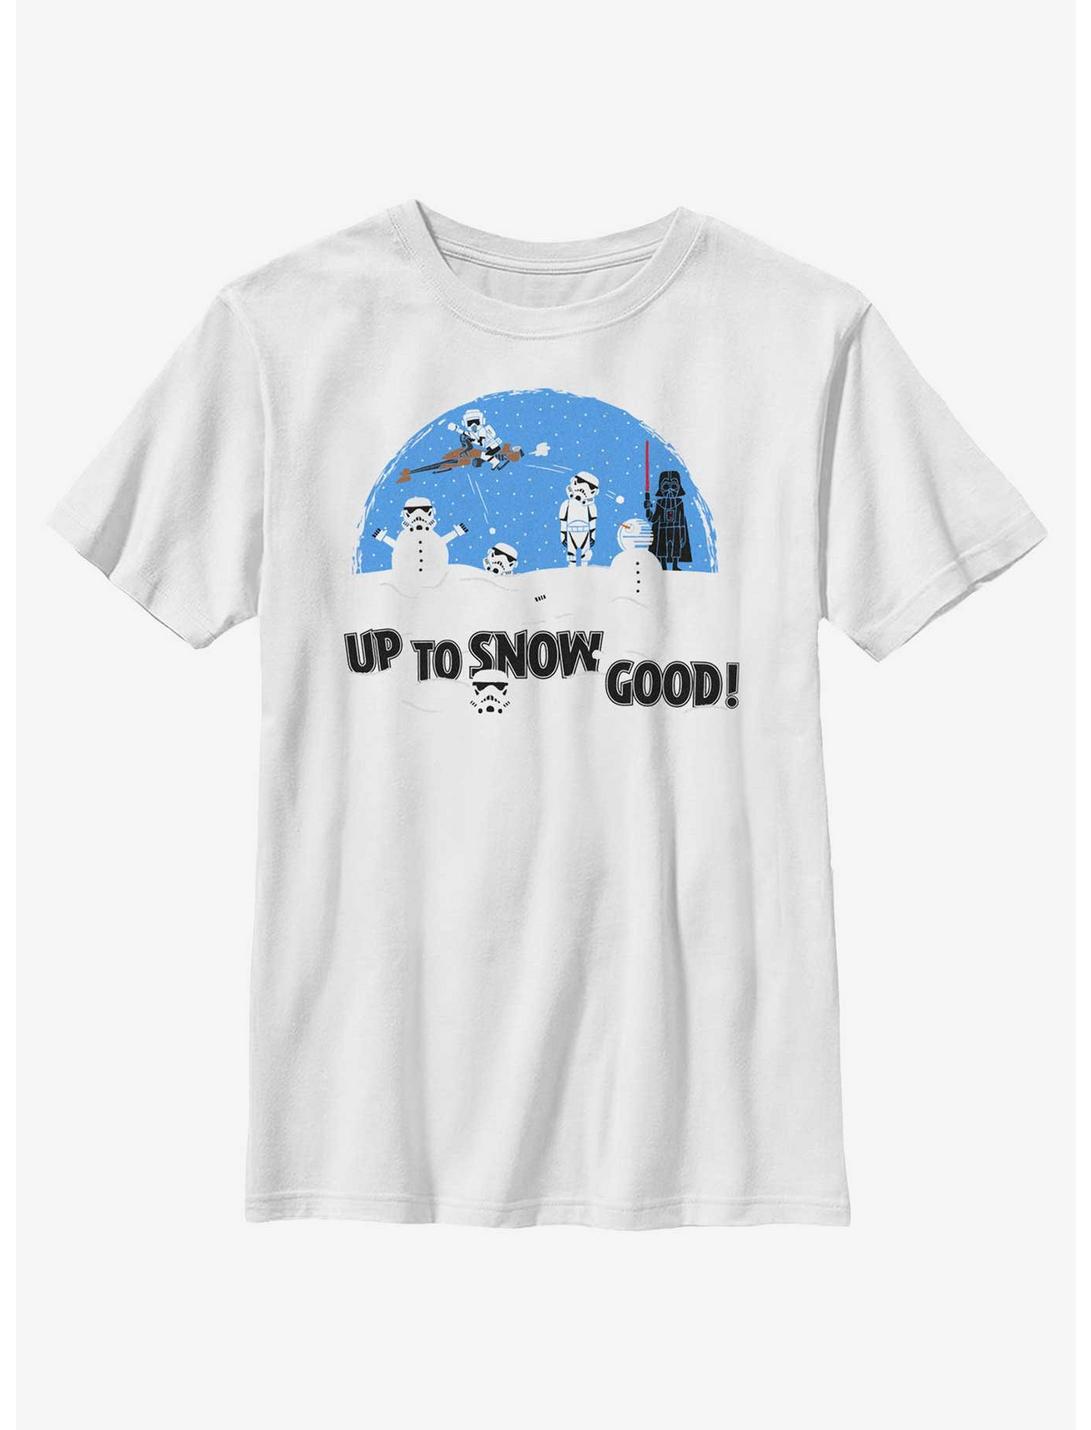 Star Wars Up To Snow Good Youth T-Shirt, WHITE, hi-res